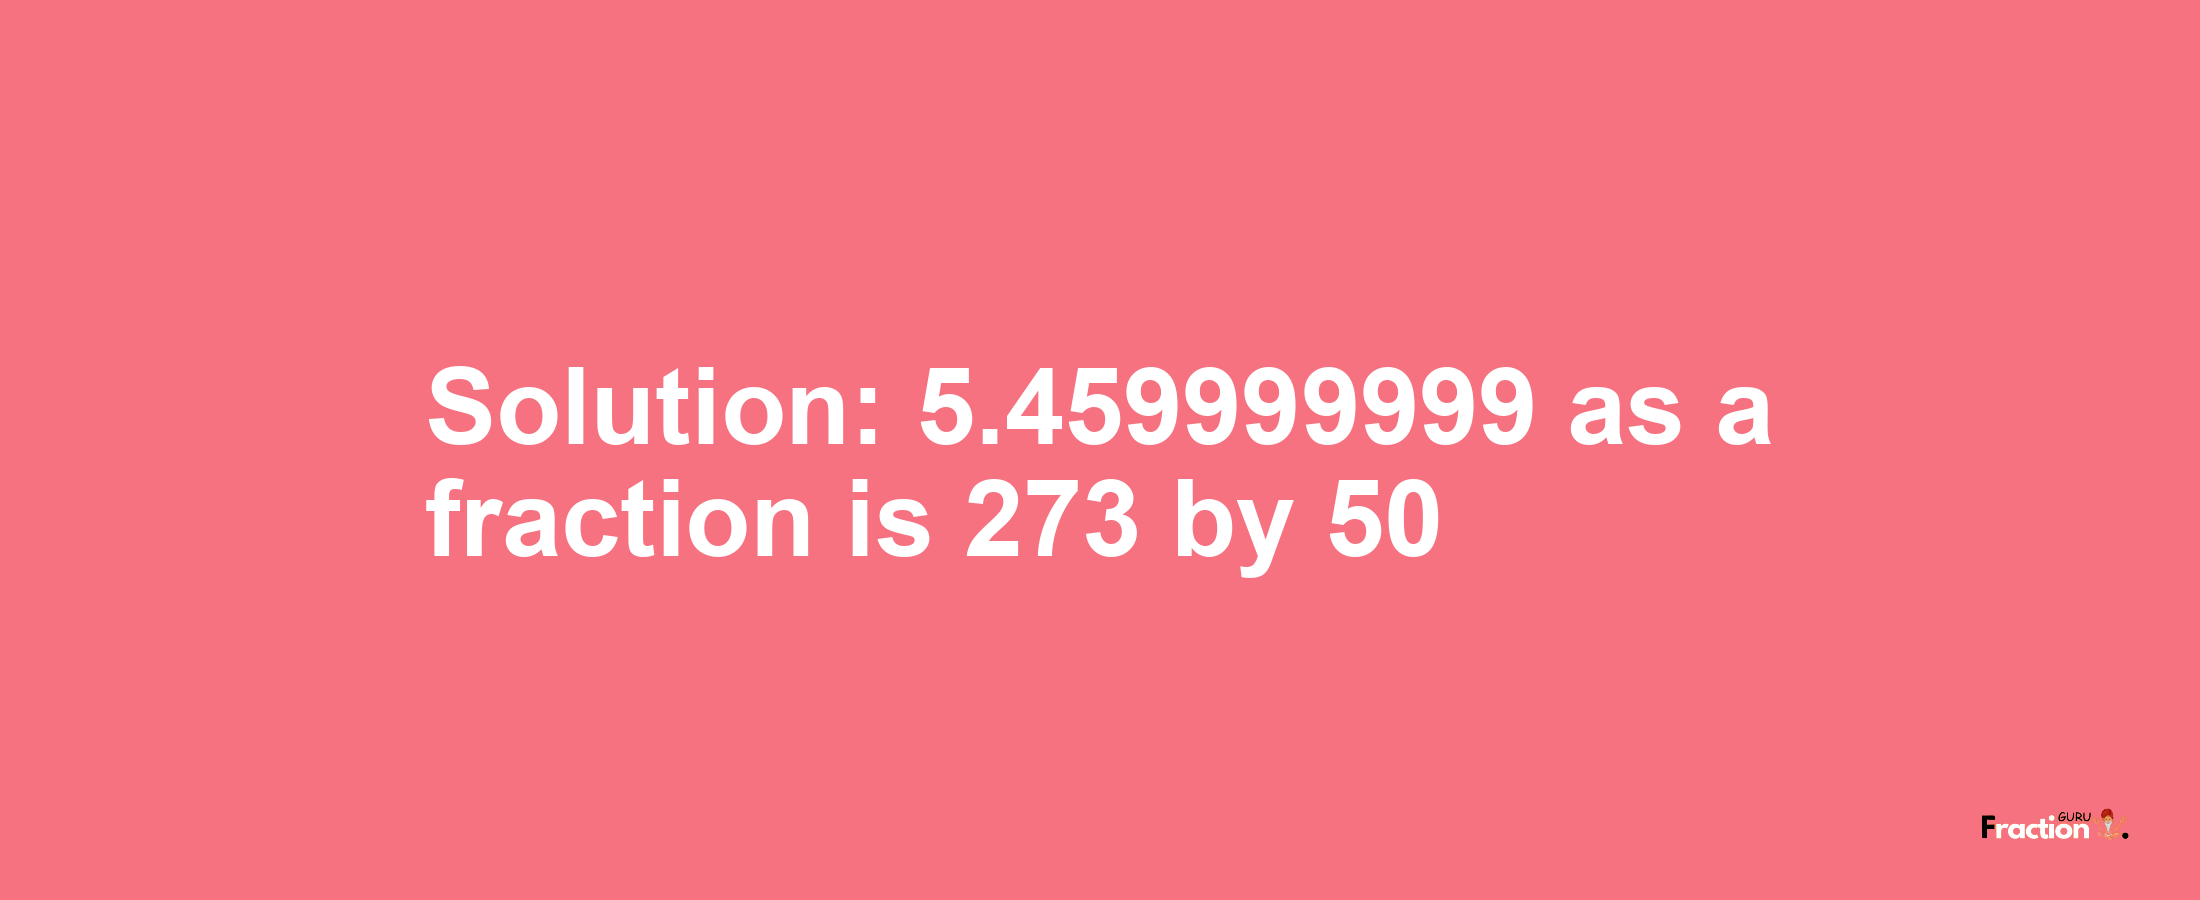 Solution:5.459999999 as a fraction is 273/50